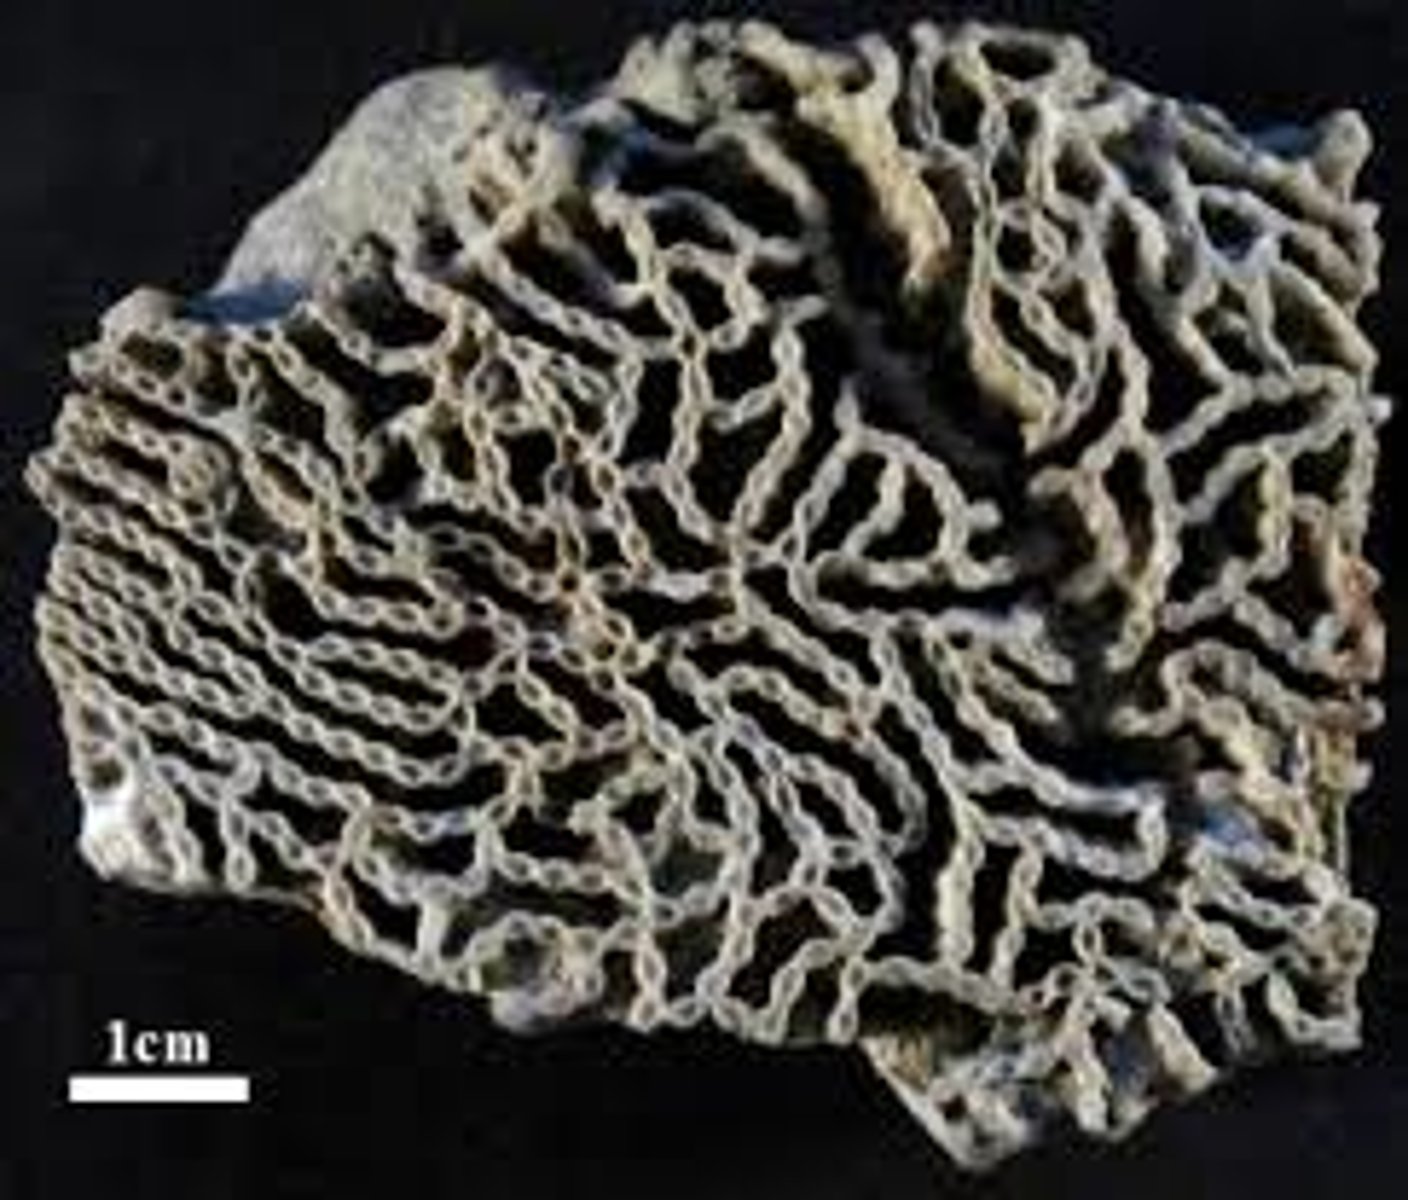 <p>extinct genus of corals found as fossils in marine rocks from the Late Ordovician Period to the end of the Silurian Period (461 million to 416 million years ago)</p><p>Phylum Cnidaria; Order Tabulata</p>